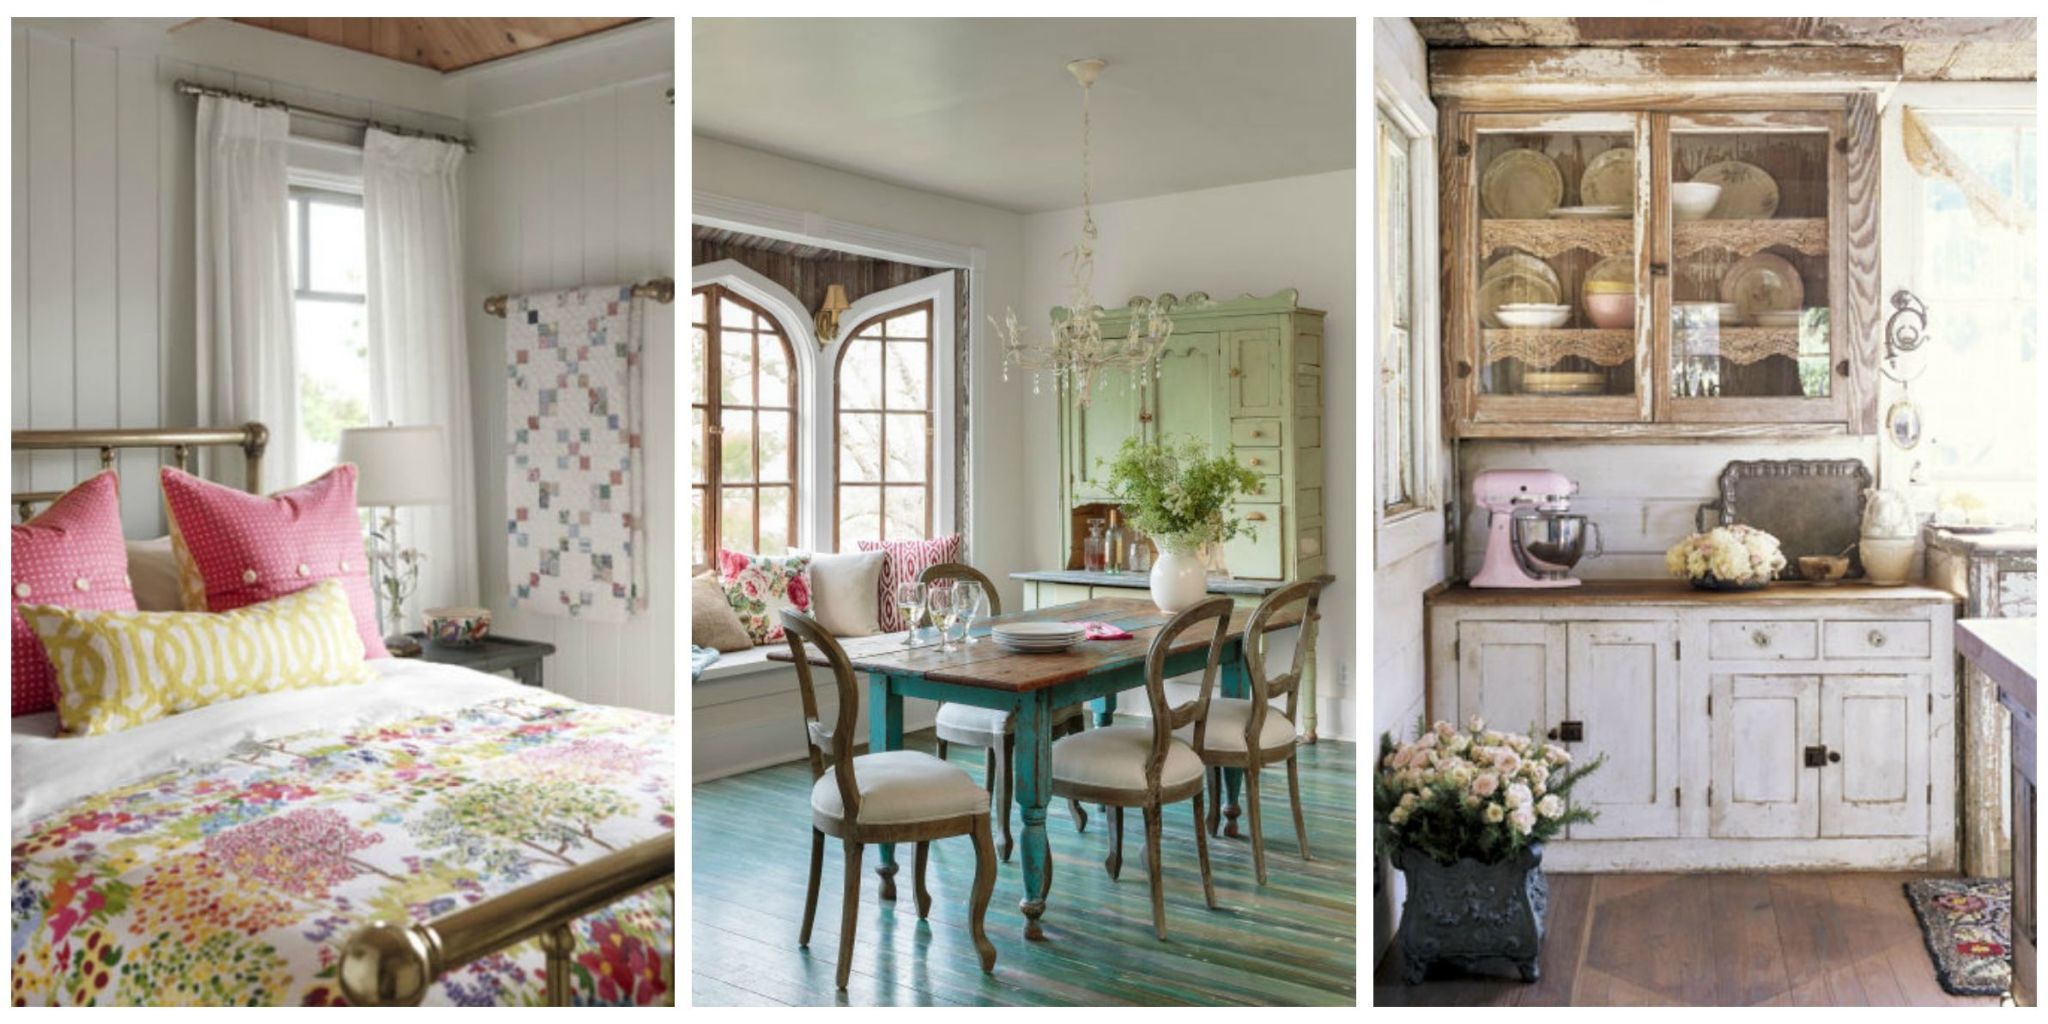 Country style decorating from california to connecticut, these country cottage getaways are filled  with inspiring decorating ideas for NMQAVYN